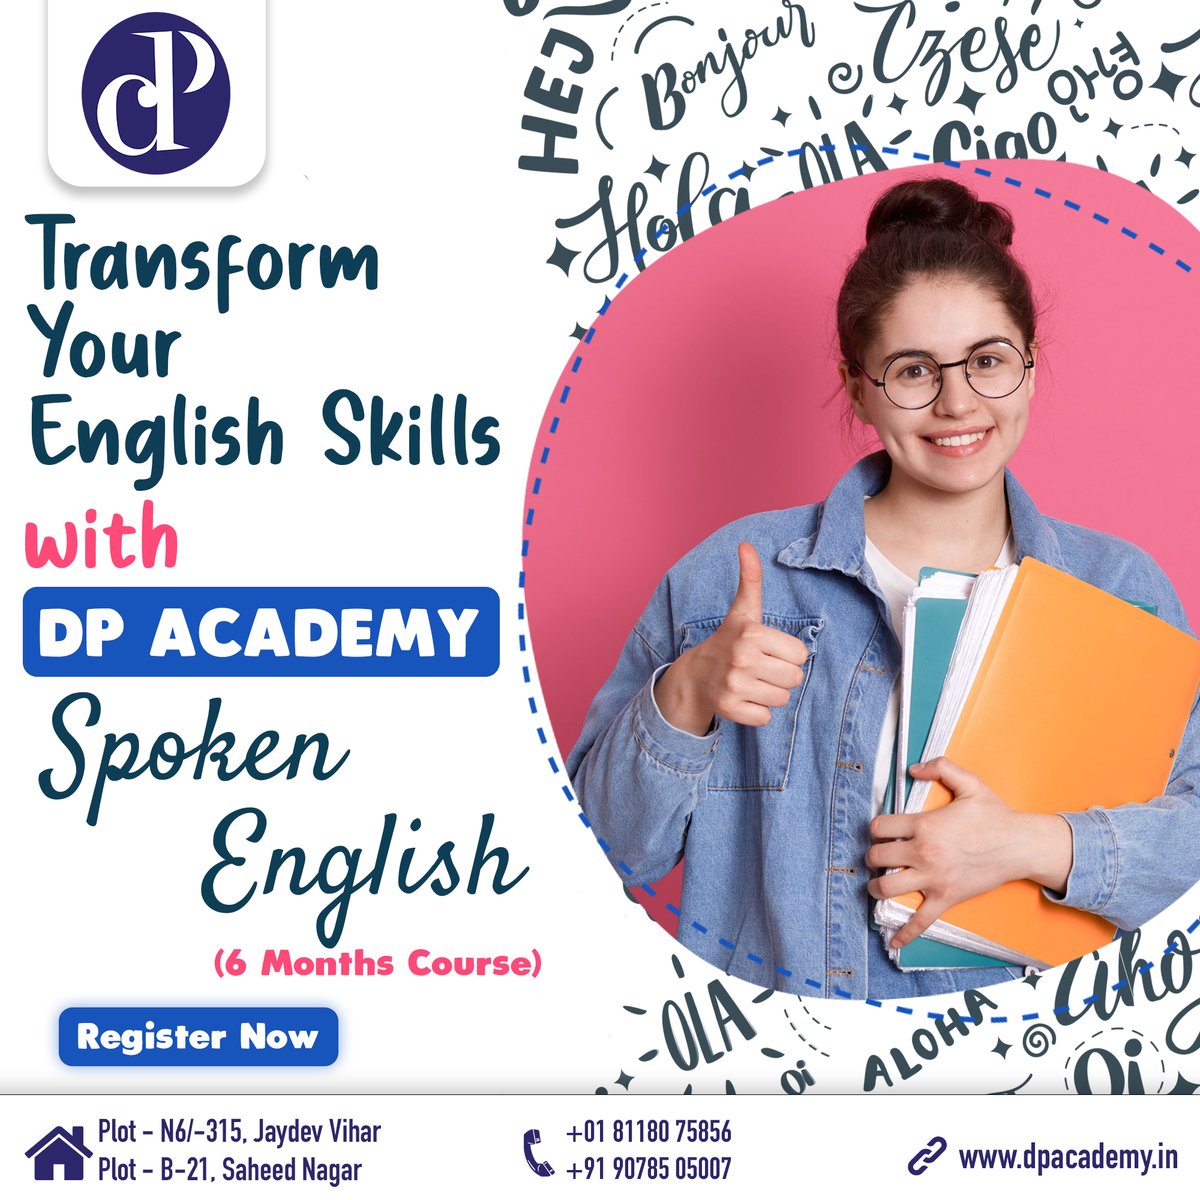 Elevate your English fluency with DP Academy's Spoken English Course! 🚀 Join now & transform your skills! 💬

#dpacademy #dpclasses #EnglishSkills #SpokenEnglish #RegisterNow #englishlanguage #spokenenglishclasses #courses